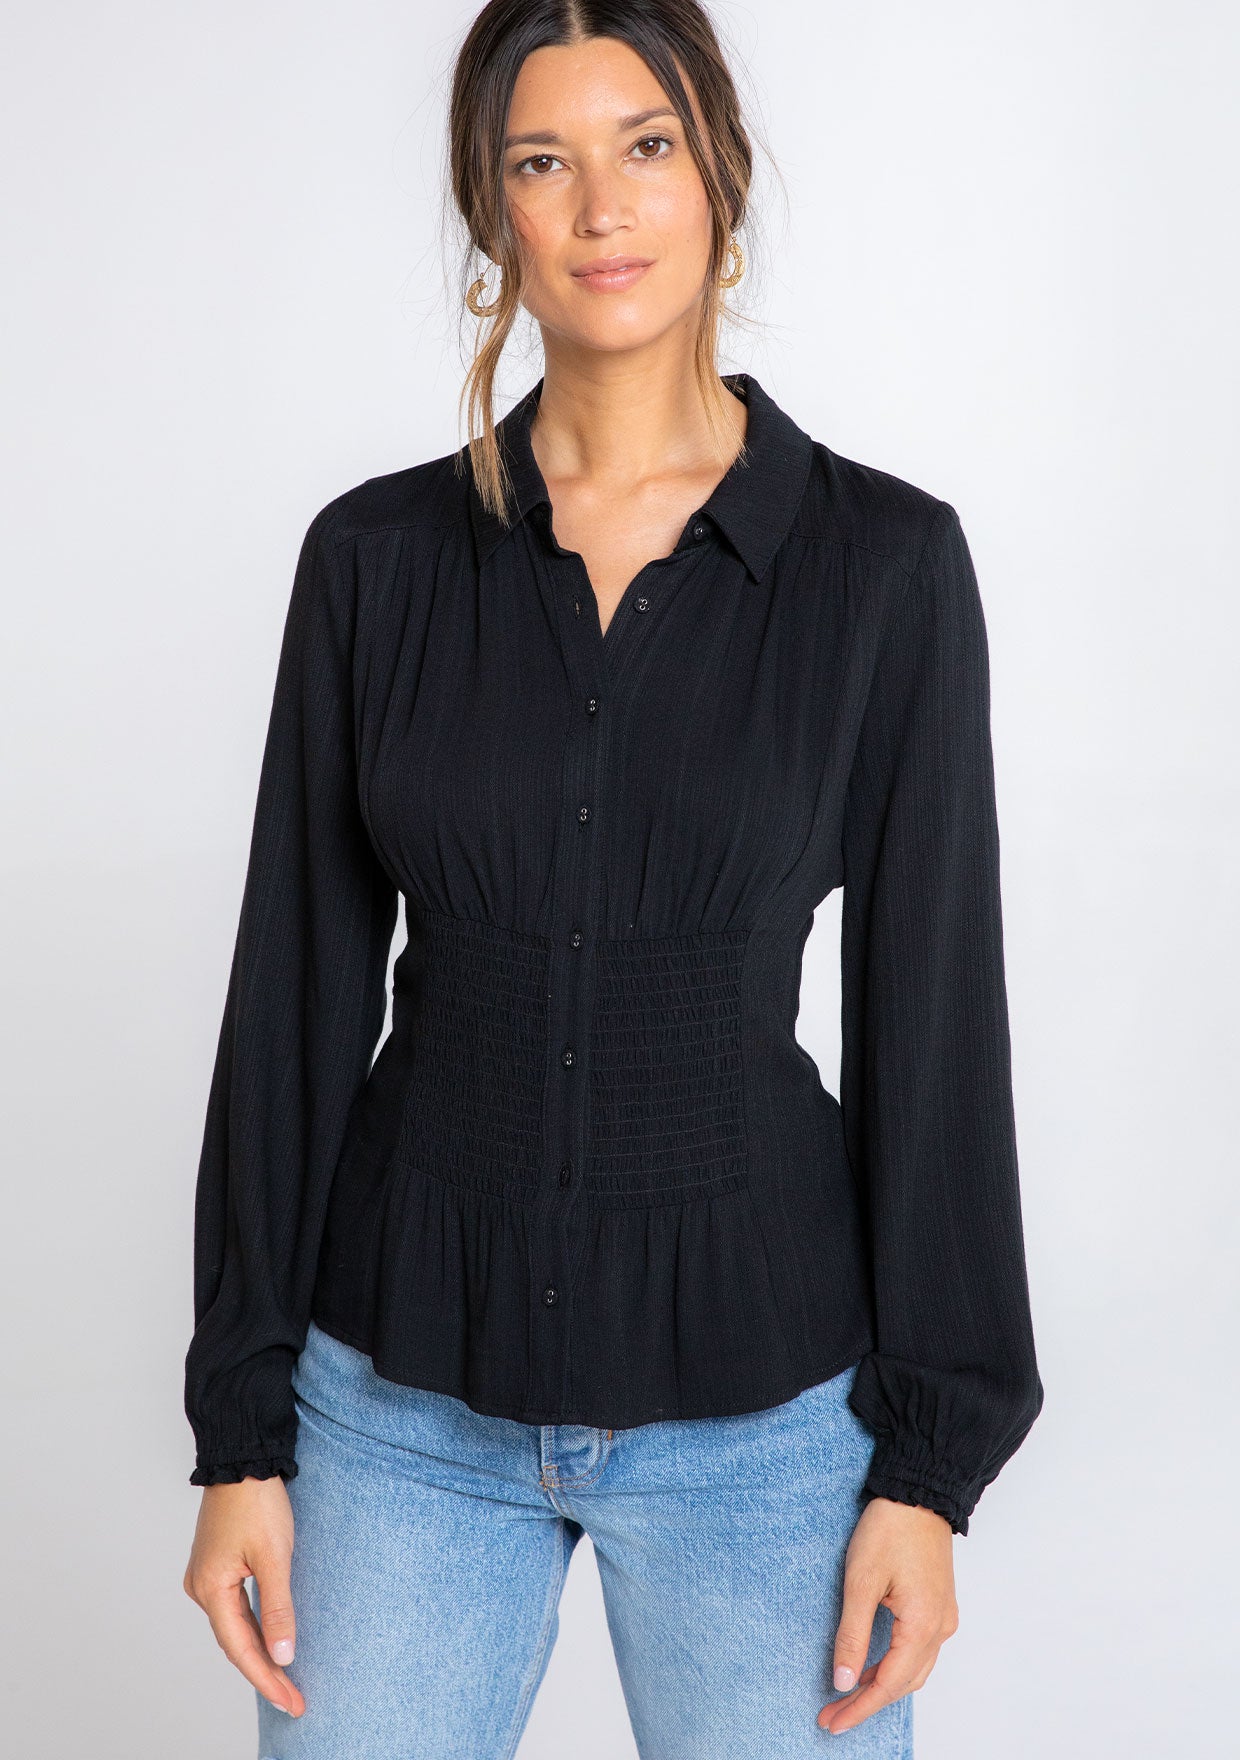 Women's Top - Elevated Smocked Shirt | LOVESTITCH